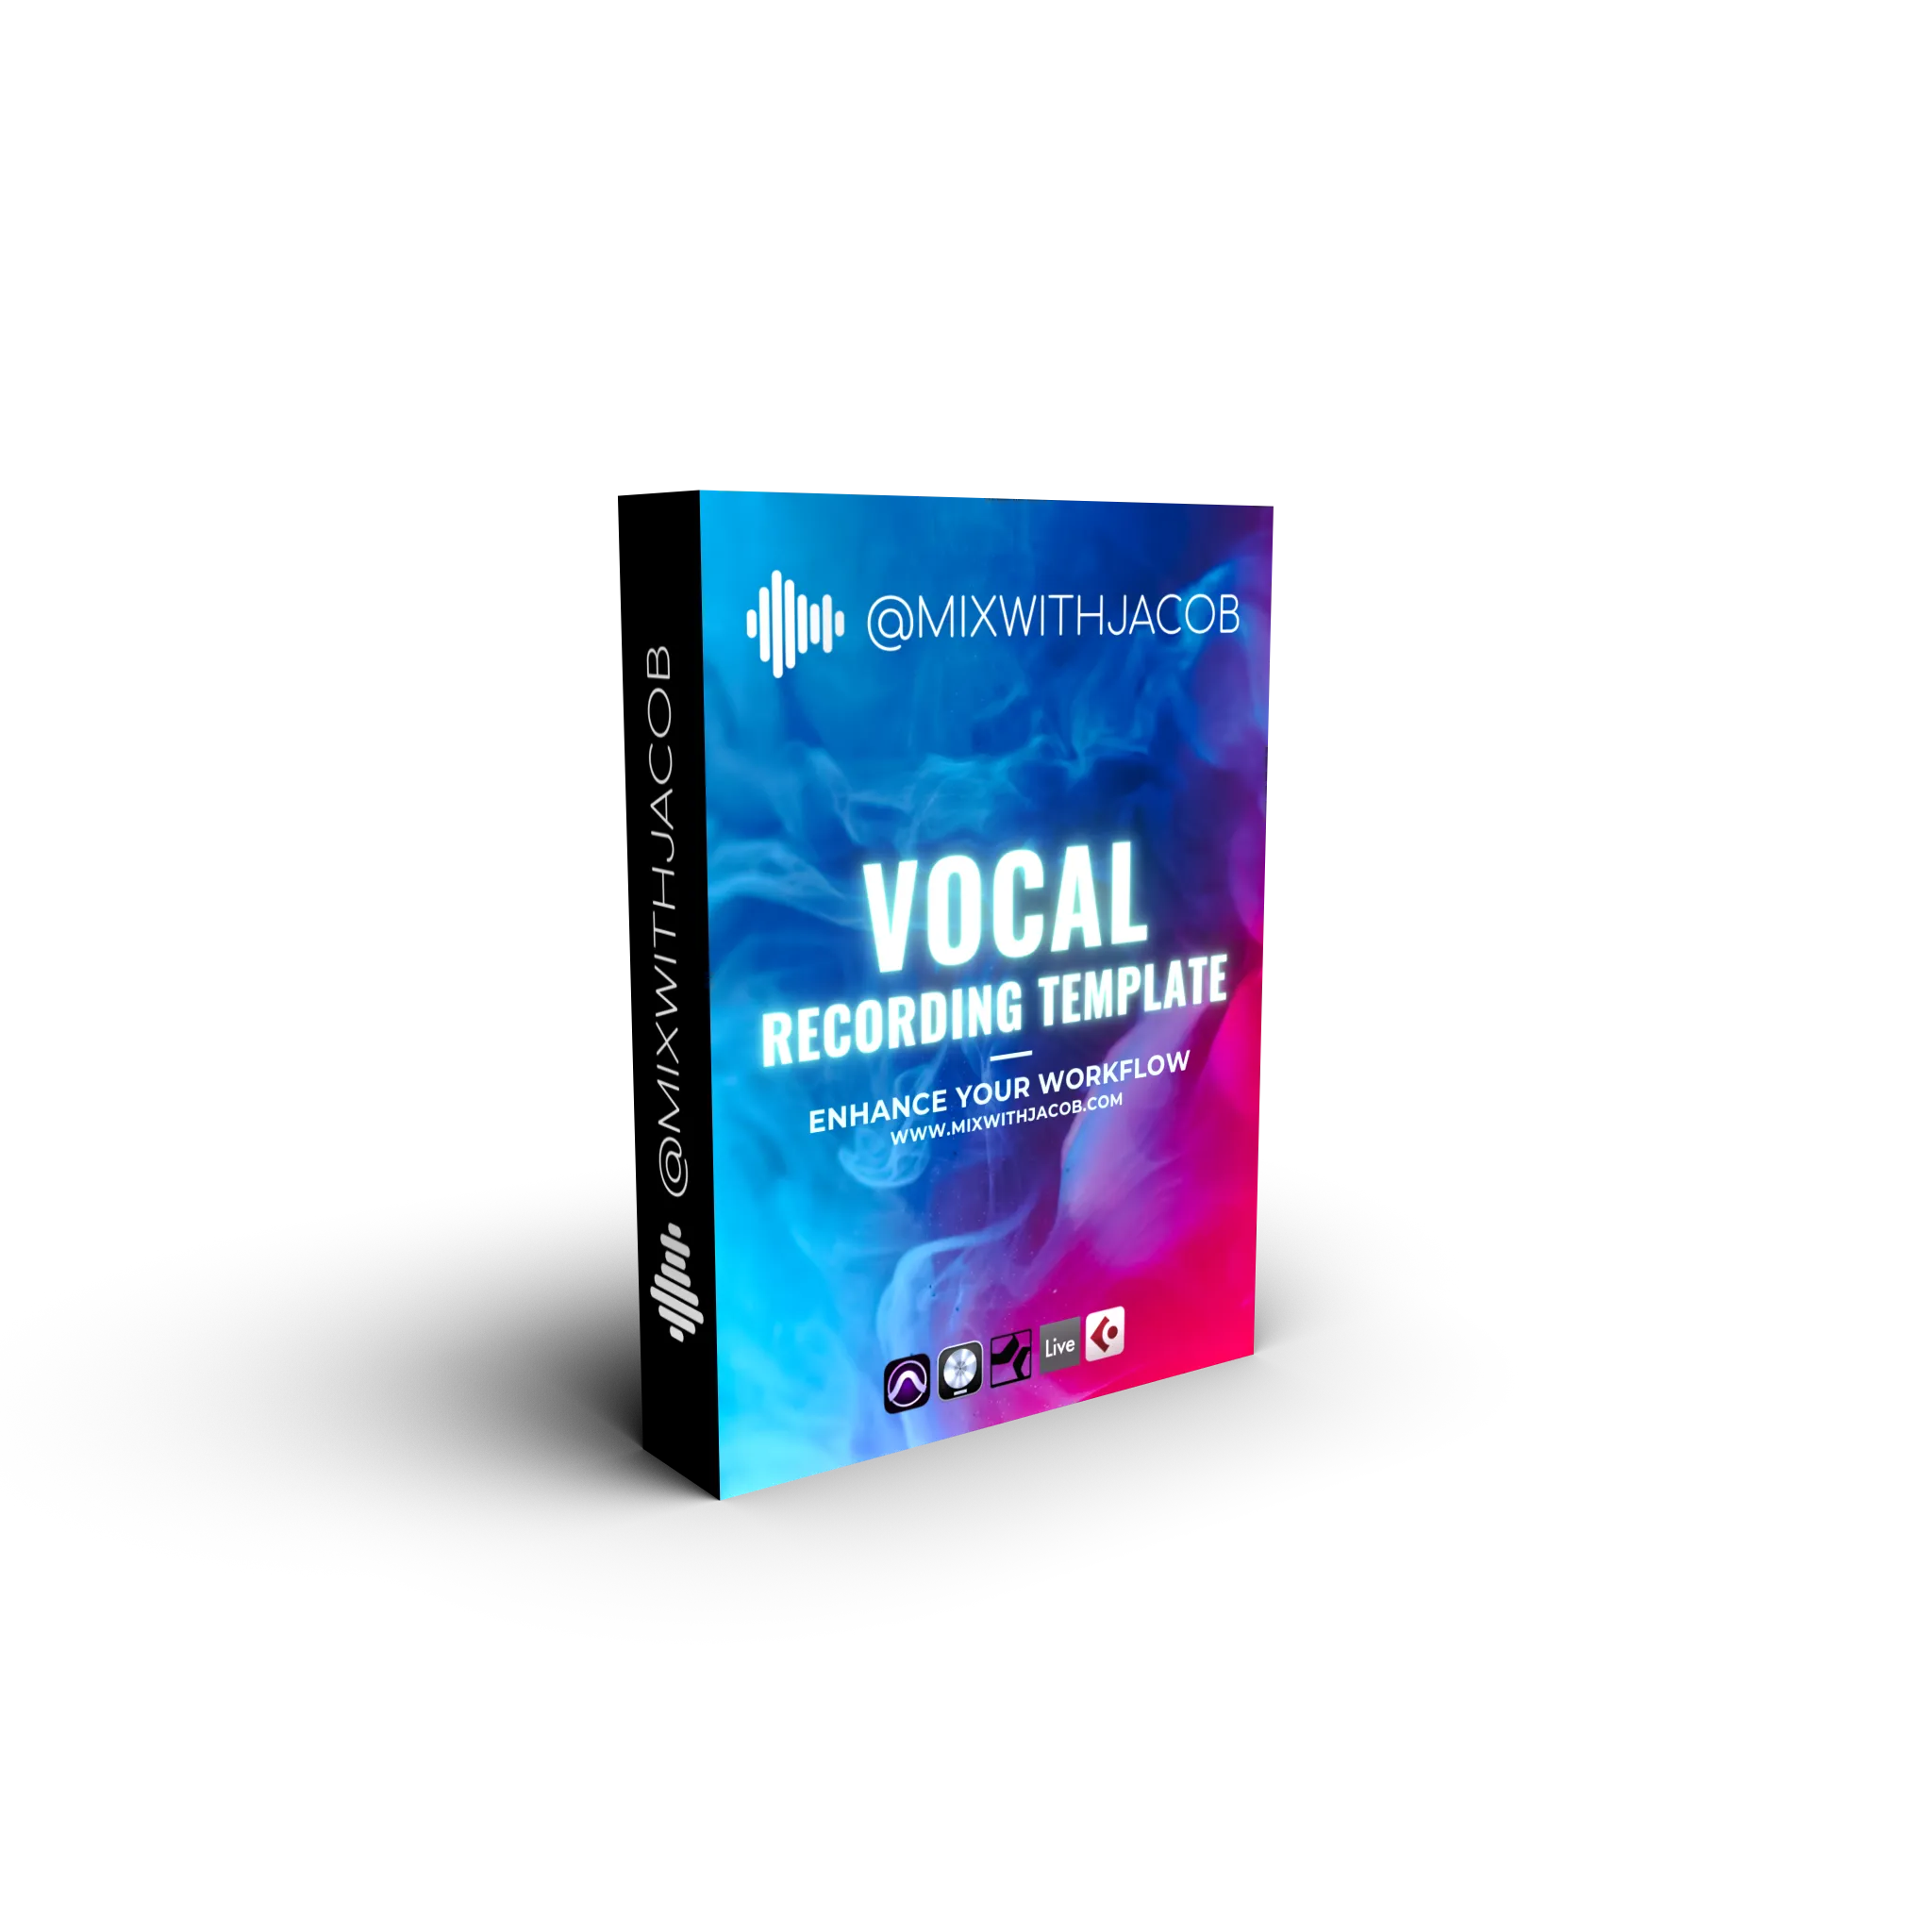 @mixwithjacob Vocal Recording Template